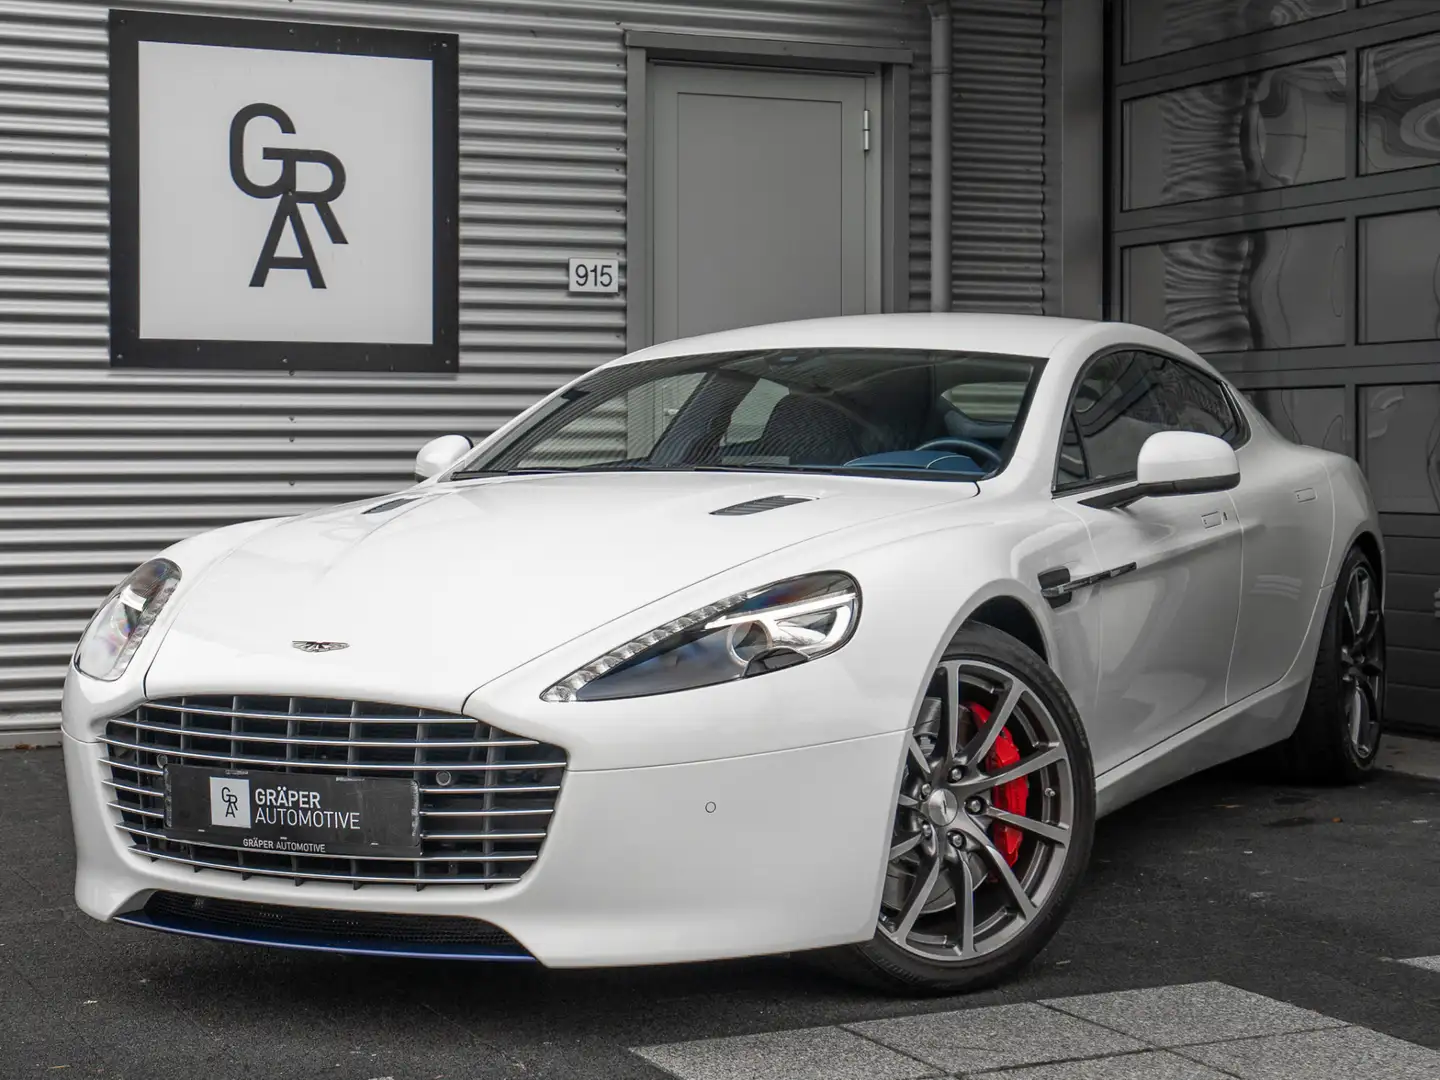 Aston Martin Rapide S 6.0 V12 ‘Britain is Great’ Edition by Q 1/8 Blanco - 1